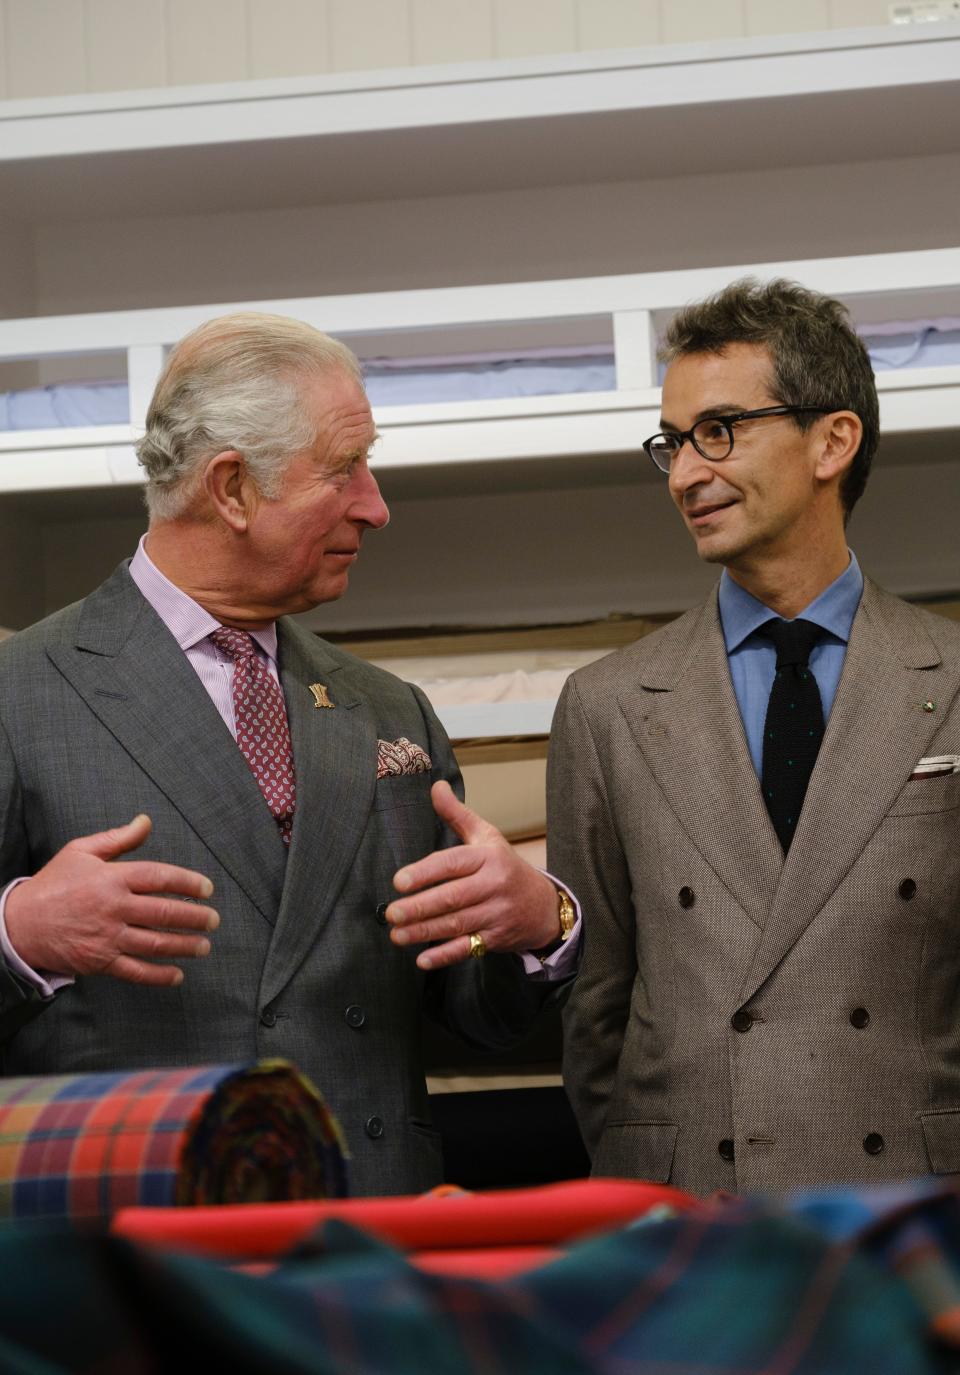 Prince Charles speaks with Federico Marchetti at Dumfries House, September 2020.